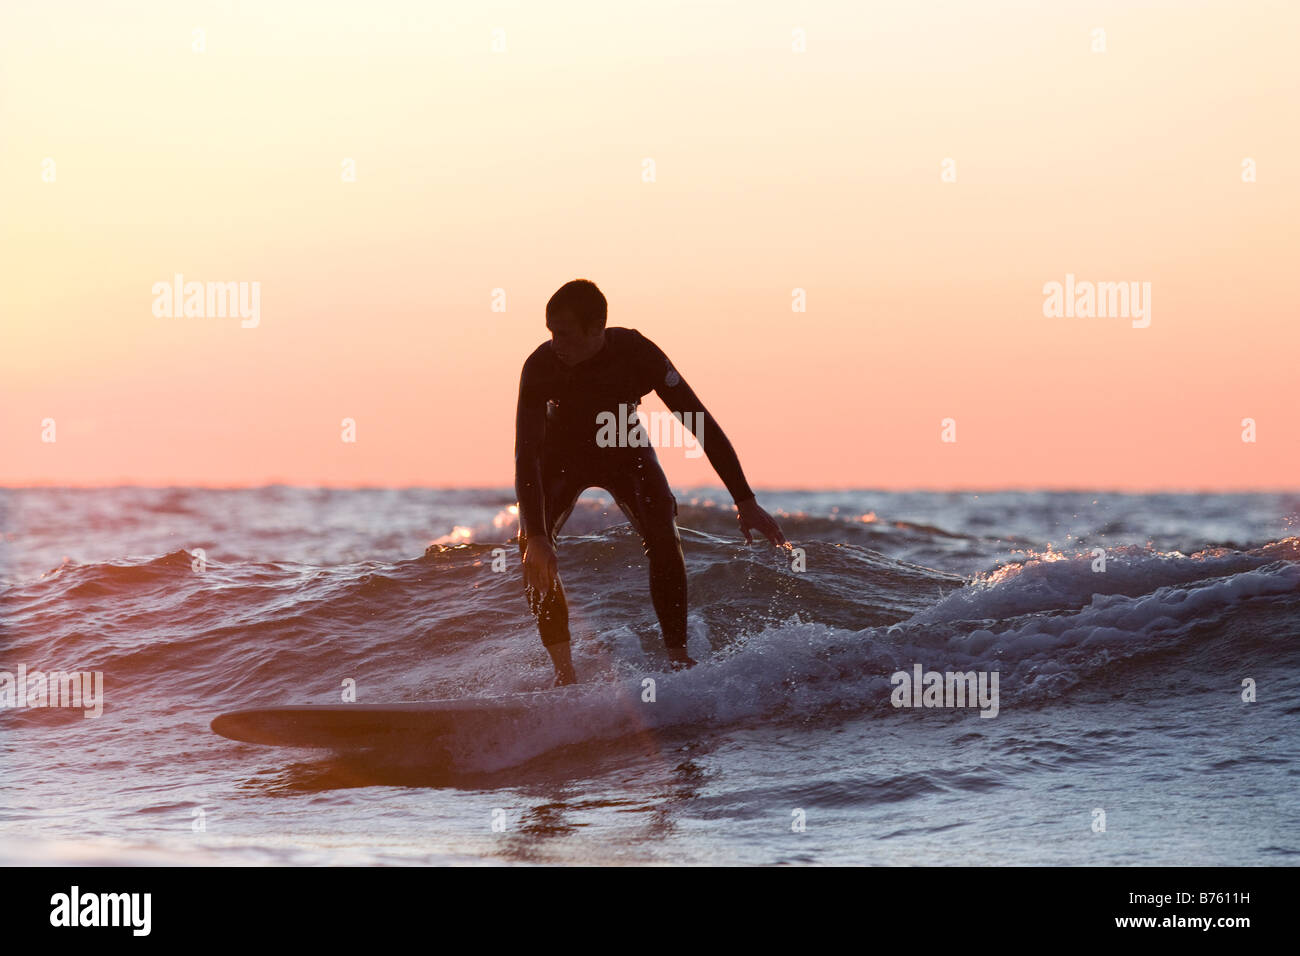 Experienced surfer riding small wave on Lake Michigan Stock Photo